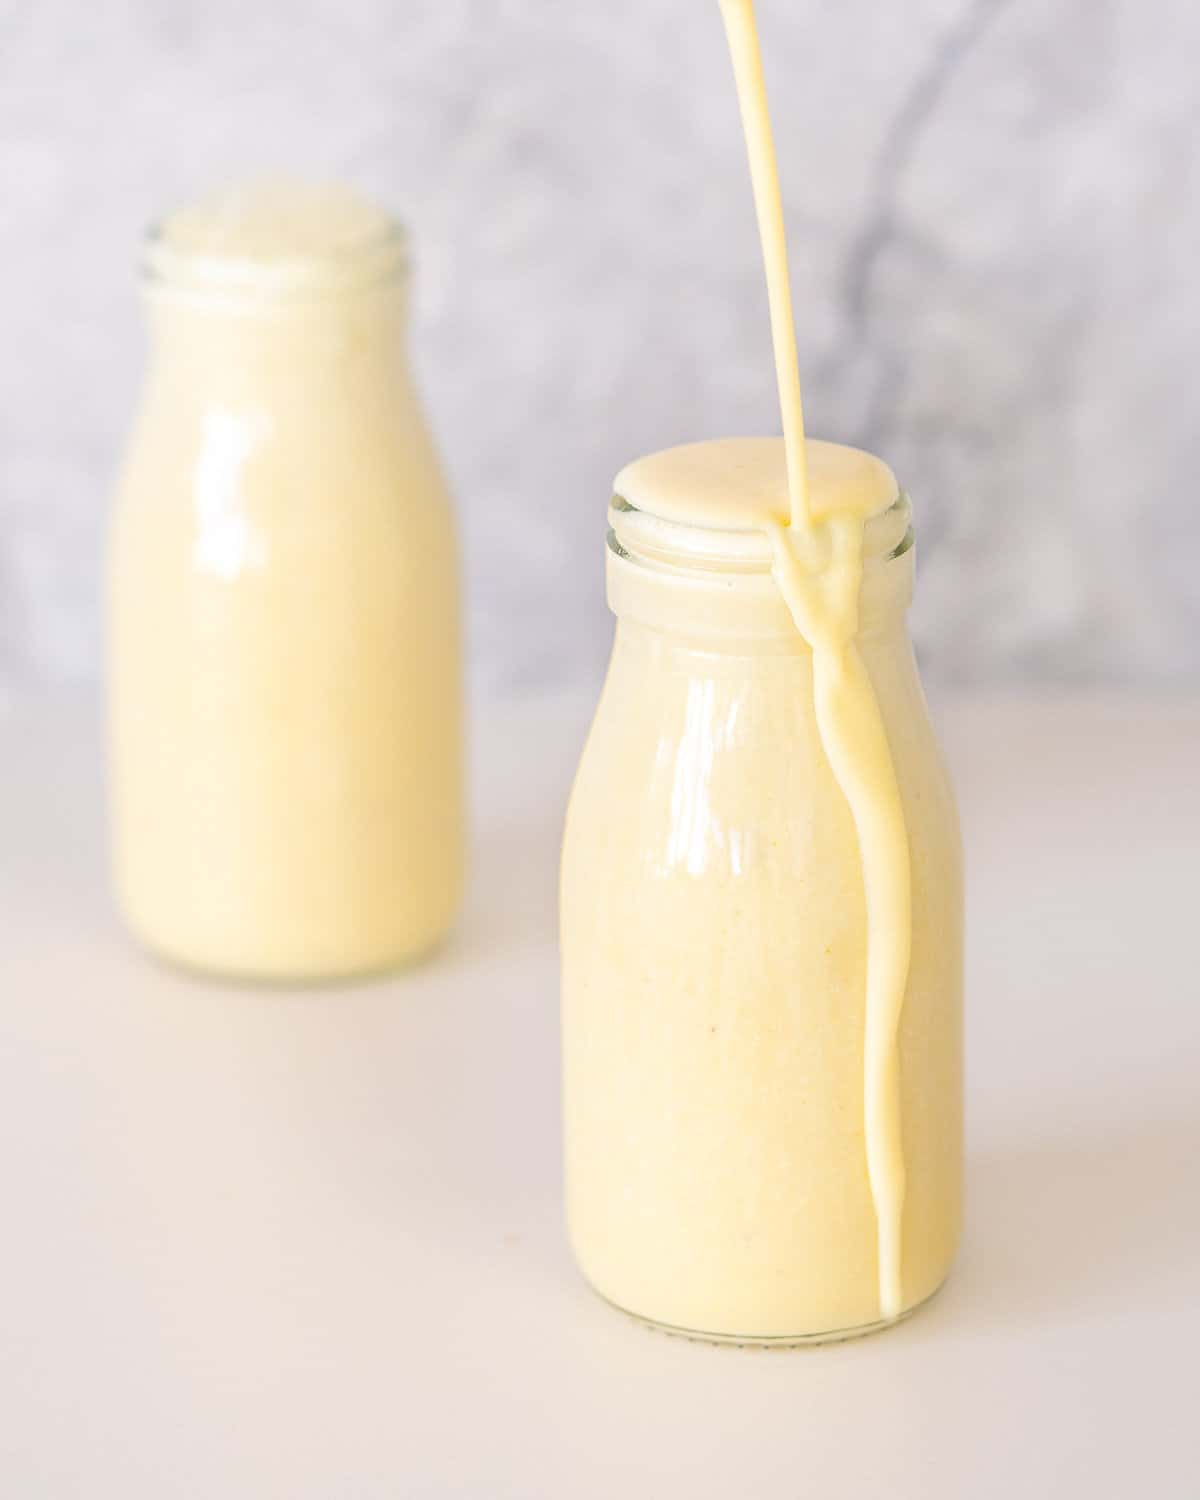 Banana milk being poured into a small glass bottle until it overflows. 